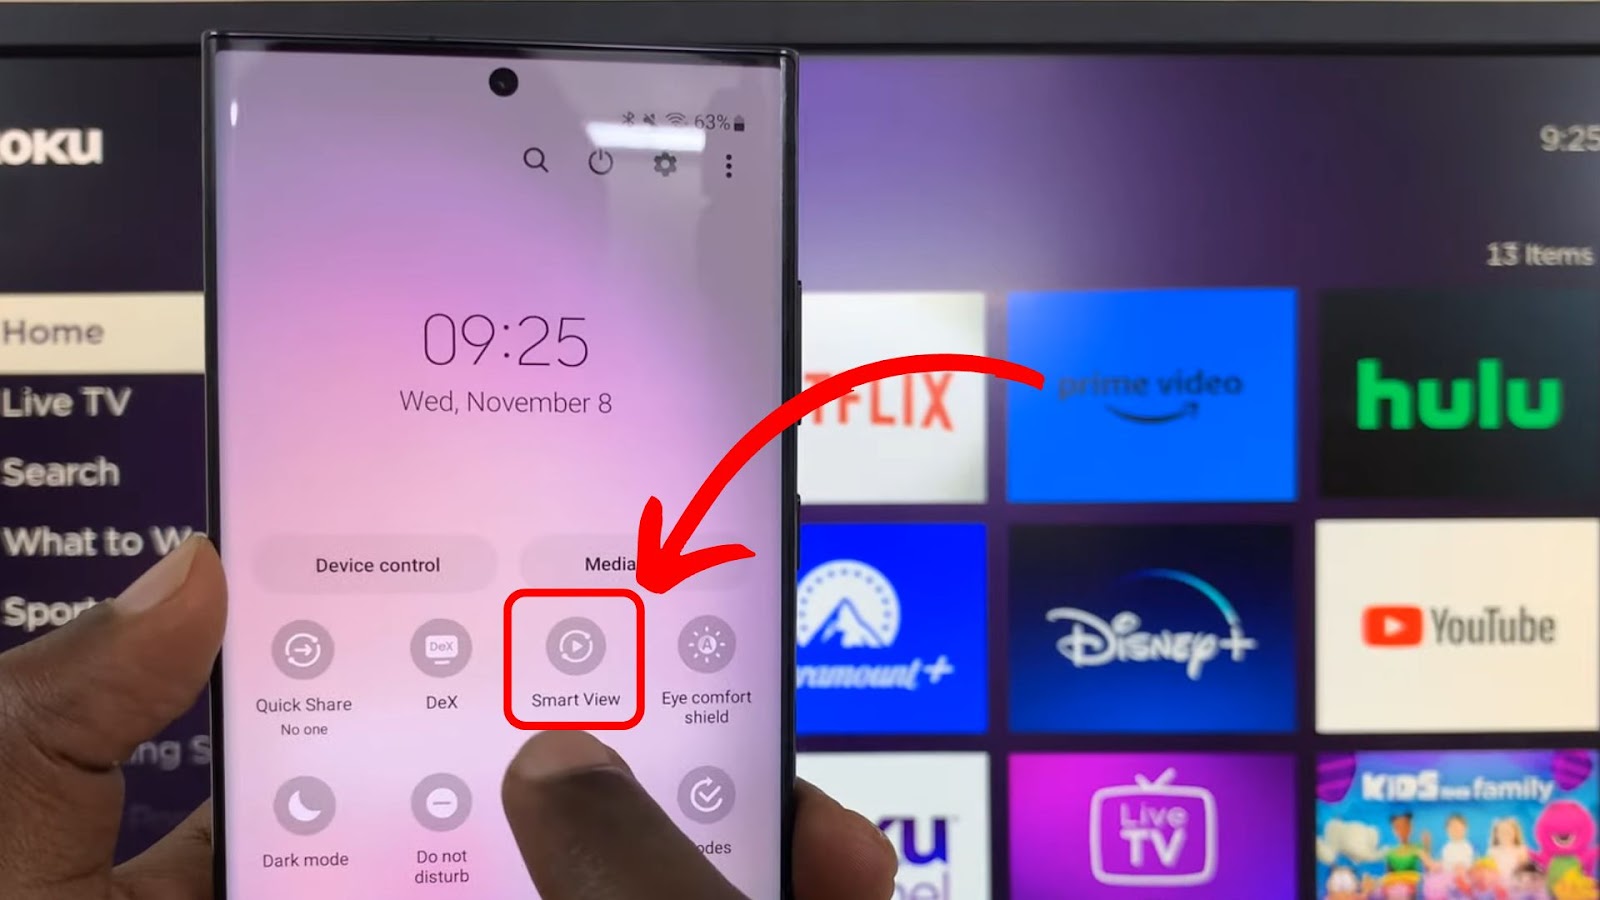 How to Enable Screen Mirroring from Android to Roku